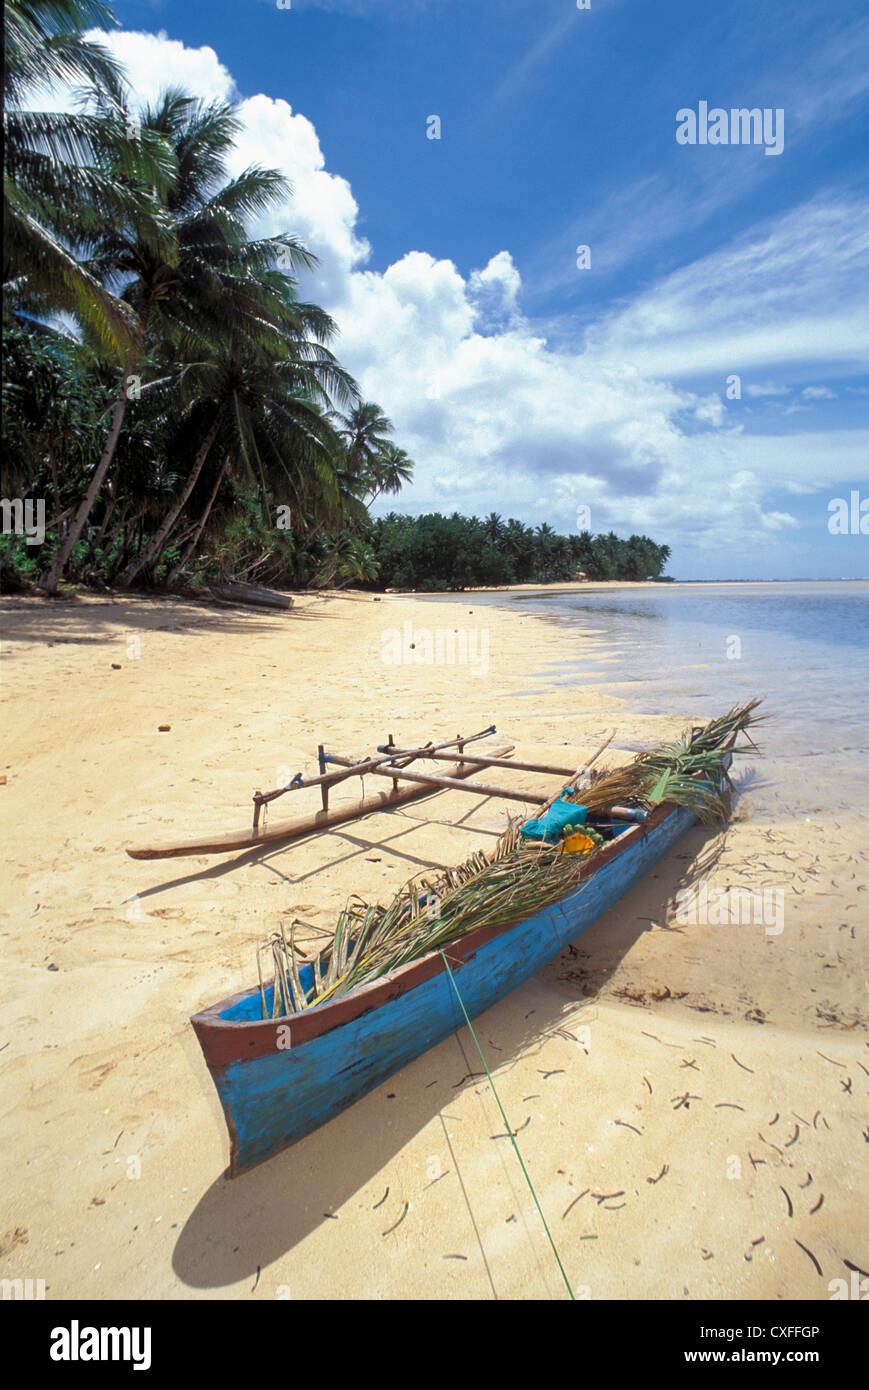 Outrigger canoe on palm tree-lined beach, village of Walung, Kosrae, Micronesia. Stock Photo